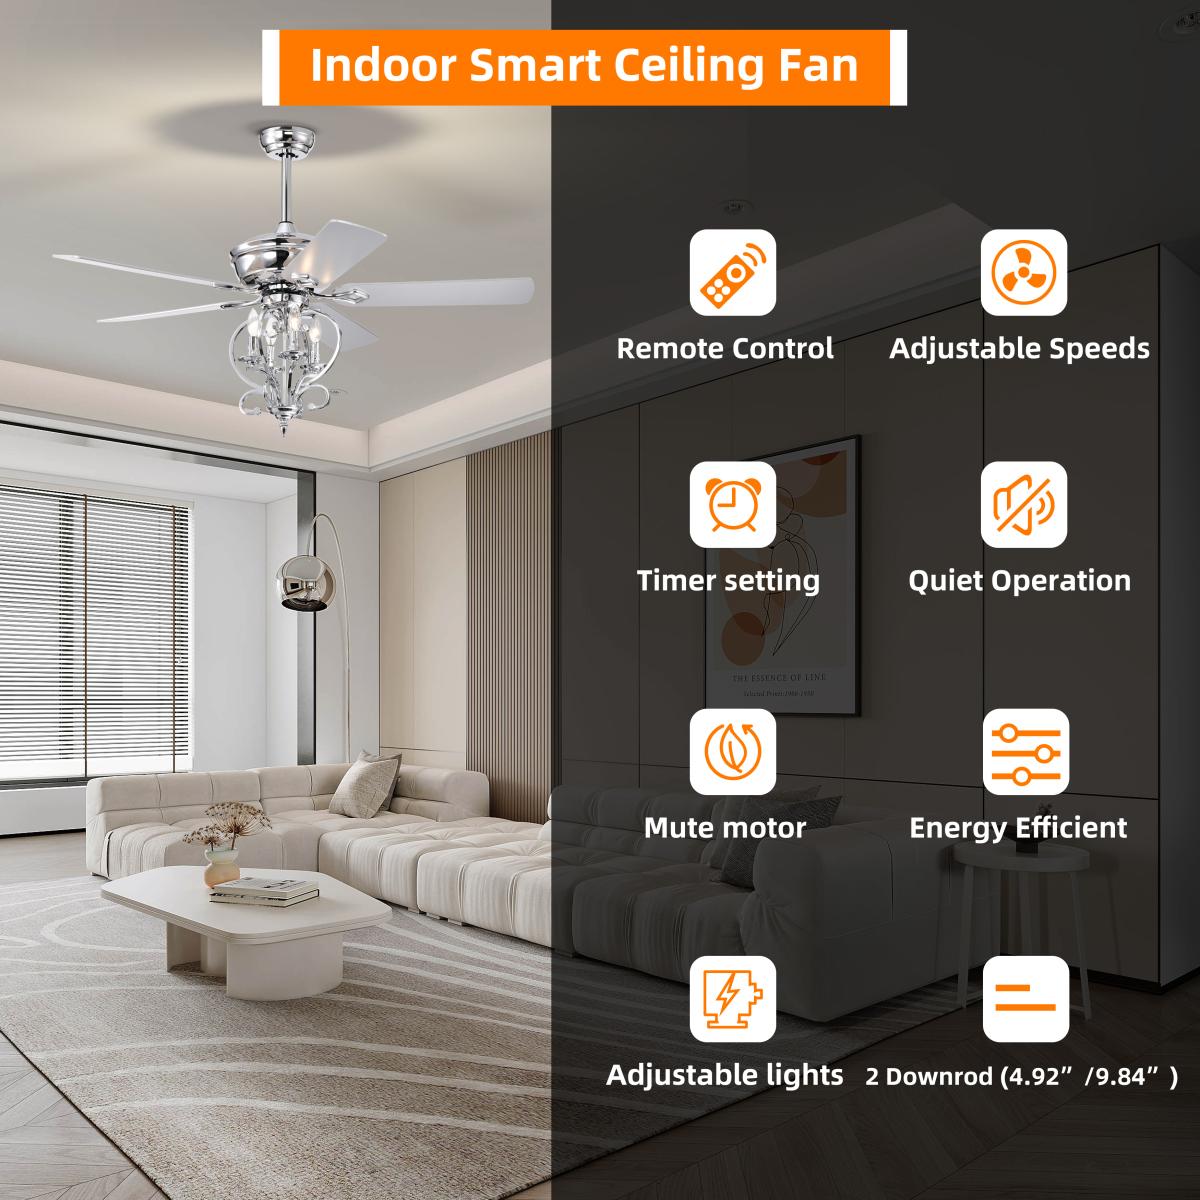 52 inch 4 Lights Ceiling Fan with 5 Wood Blades, Two-color fan blade, Ac Motor, Remote Control, Reversible Airflow, 3-Speed, Adjustable Height, Traditional Ceiling Fan for home decorate (Silver)